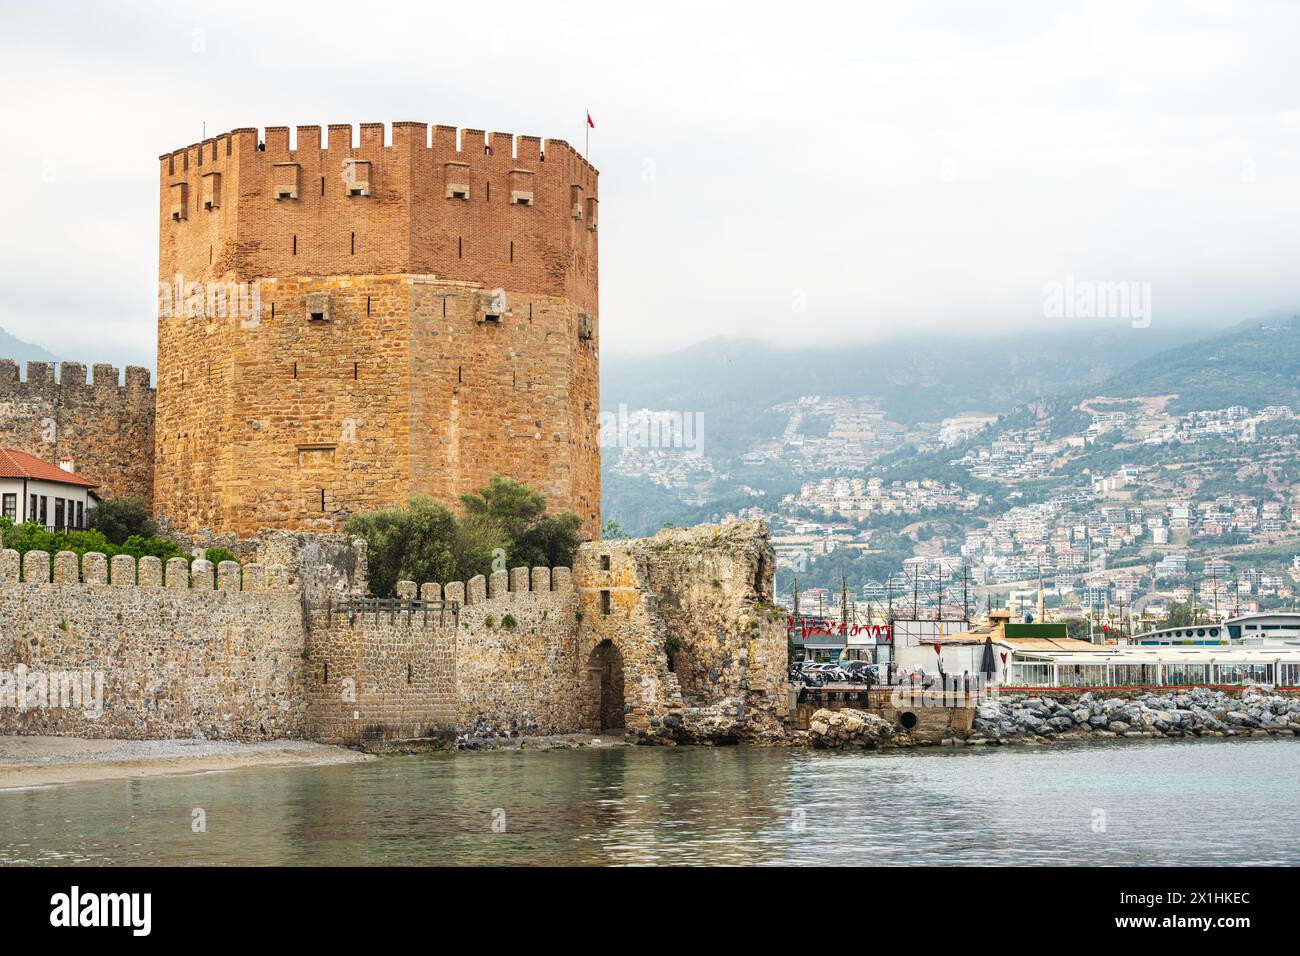 The historical Red Tower in the Alanya district of Antalya, one of the touristic regions of Turkey. Turkish name Kizil Kule Stock Photo